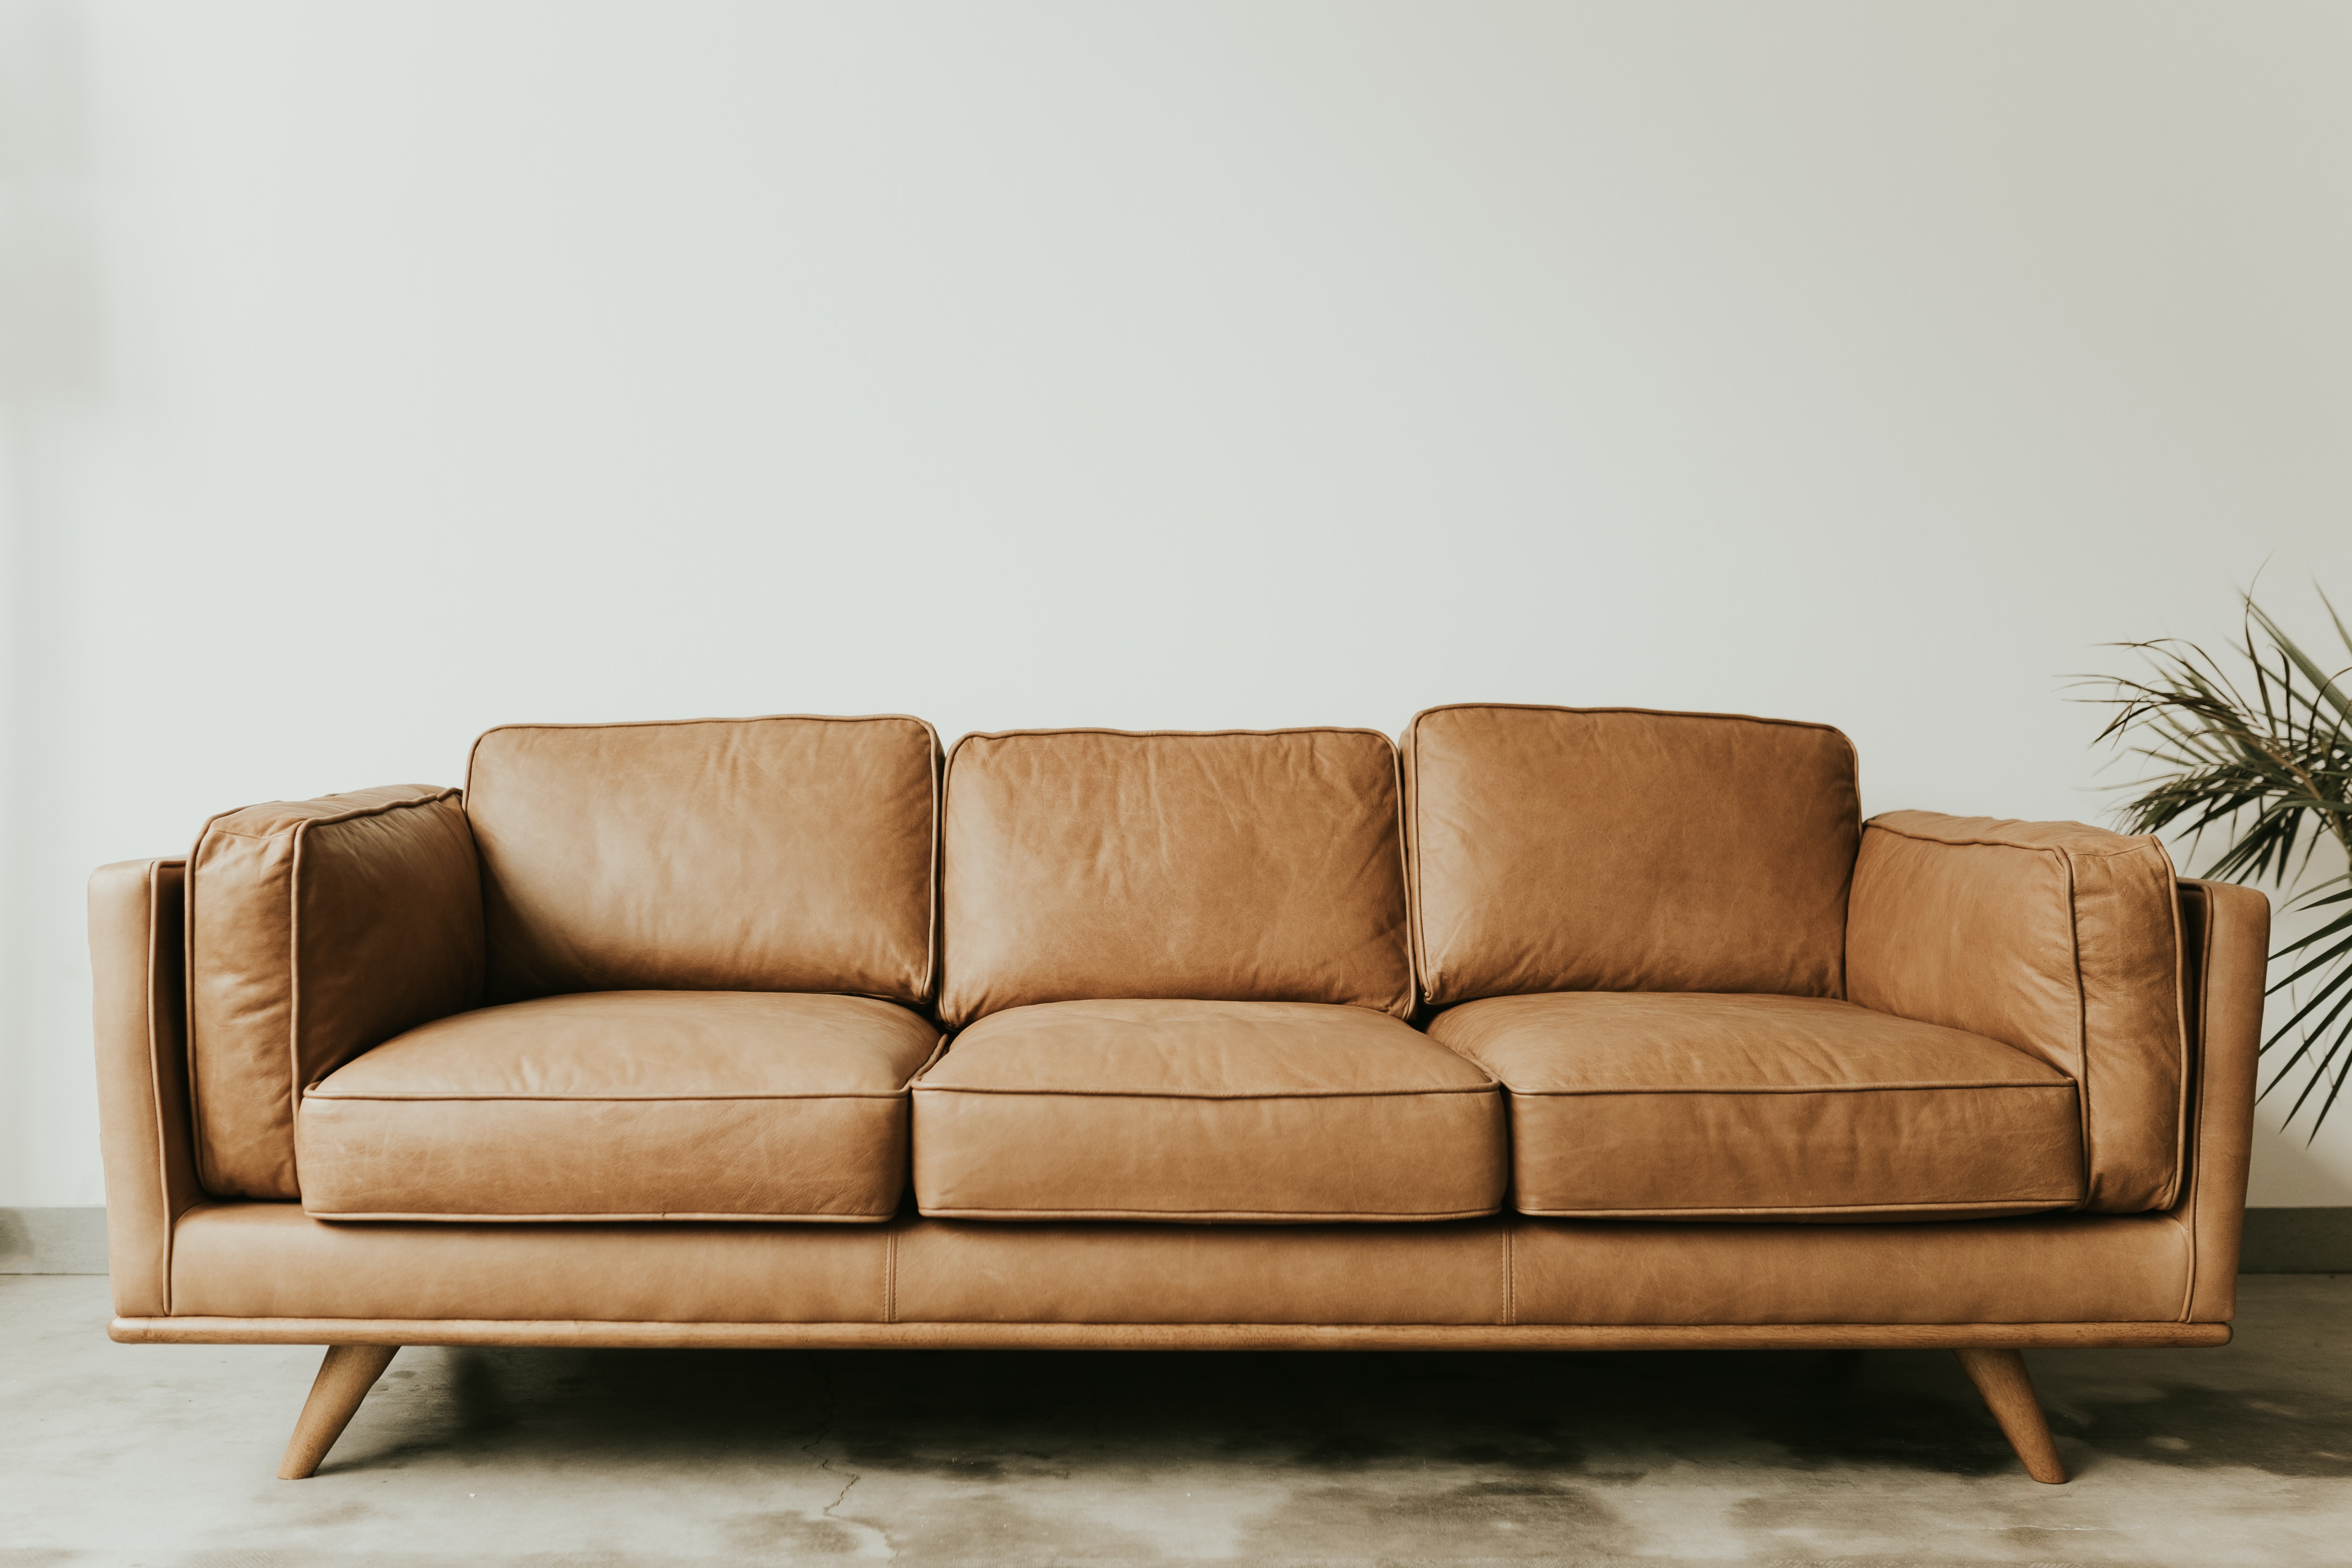 How To Protect Leather Furniture